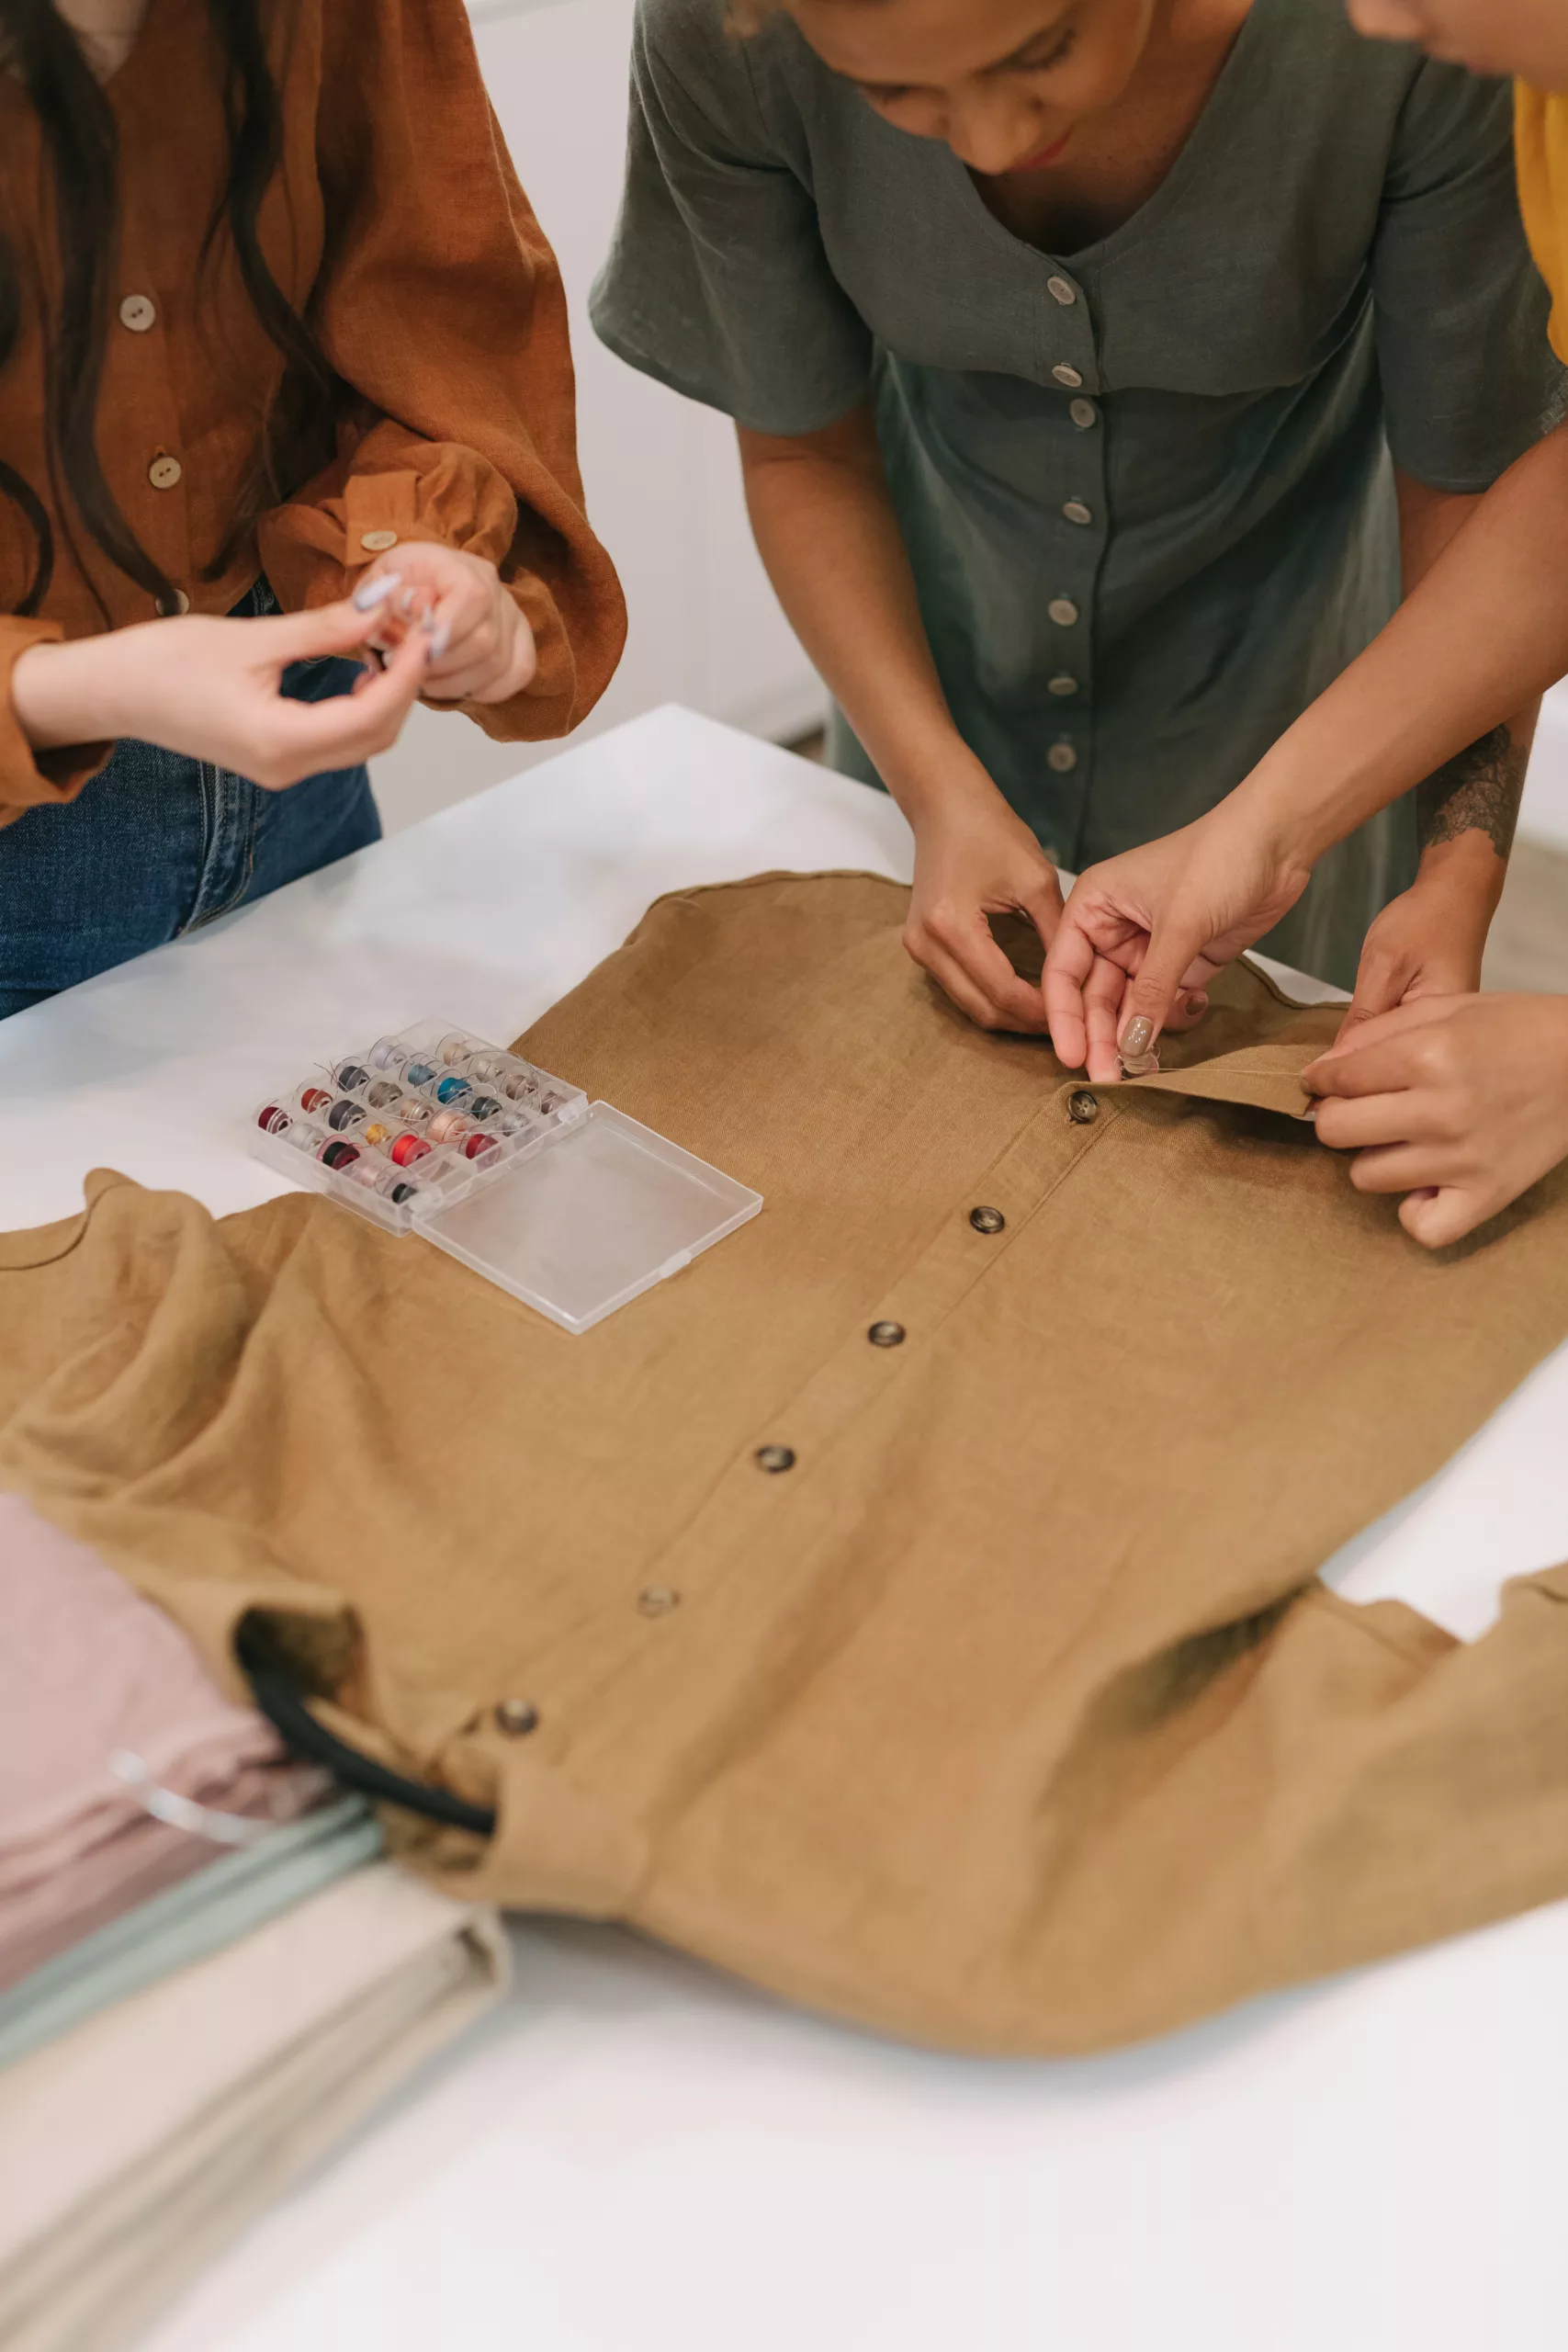 Hemp Clothing: The New Trend in Sustainable Fashion